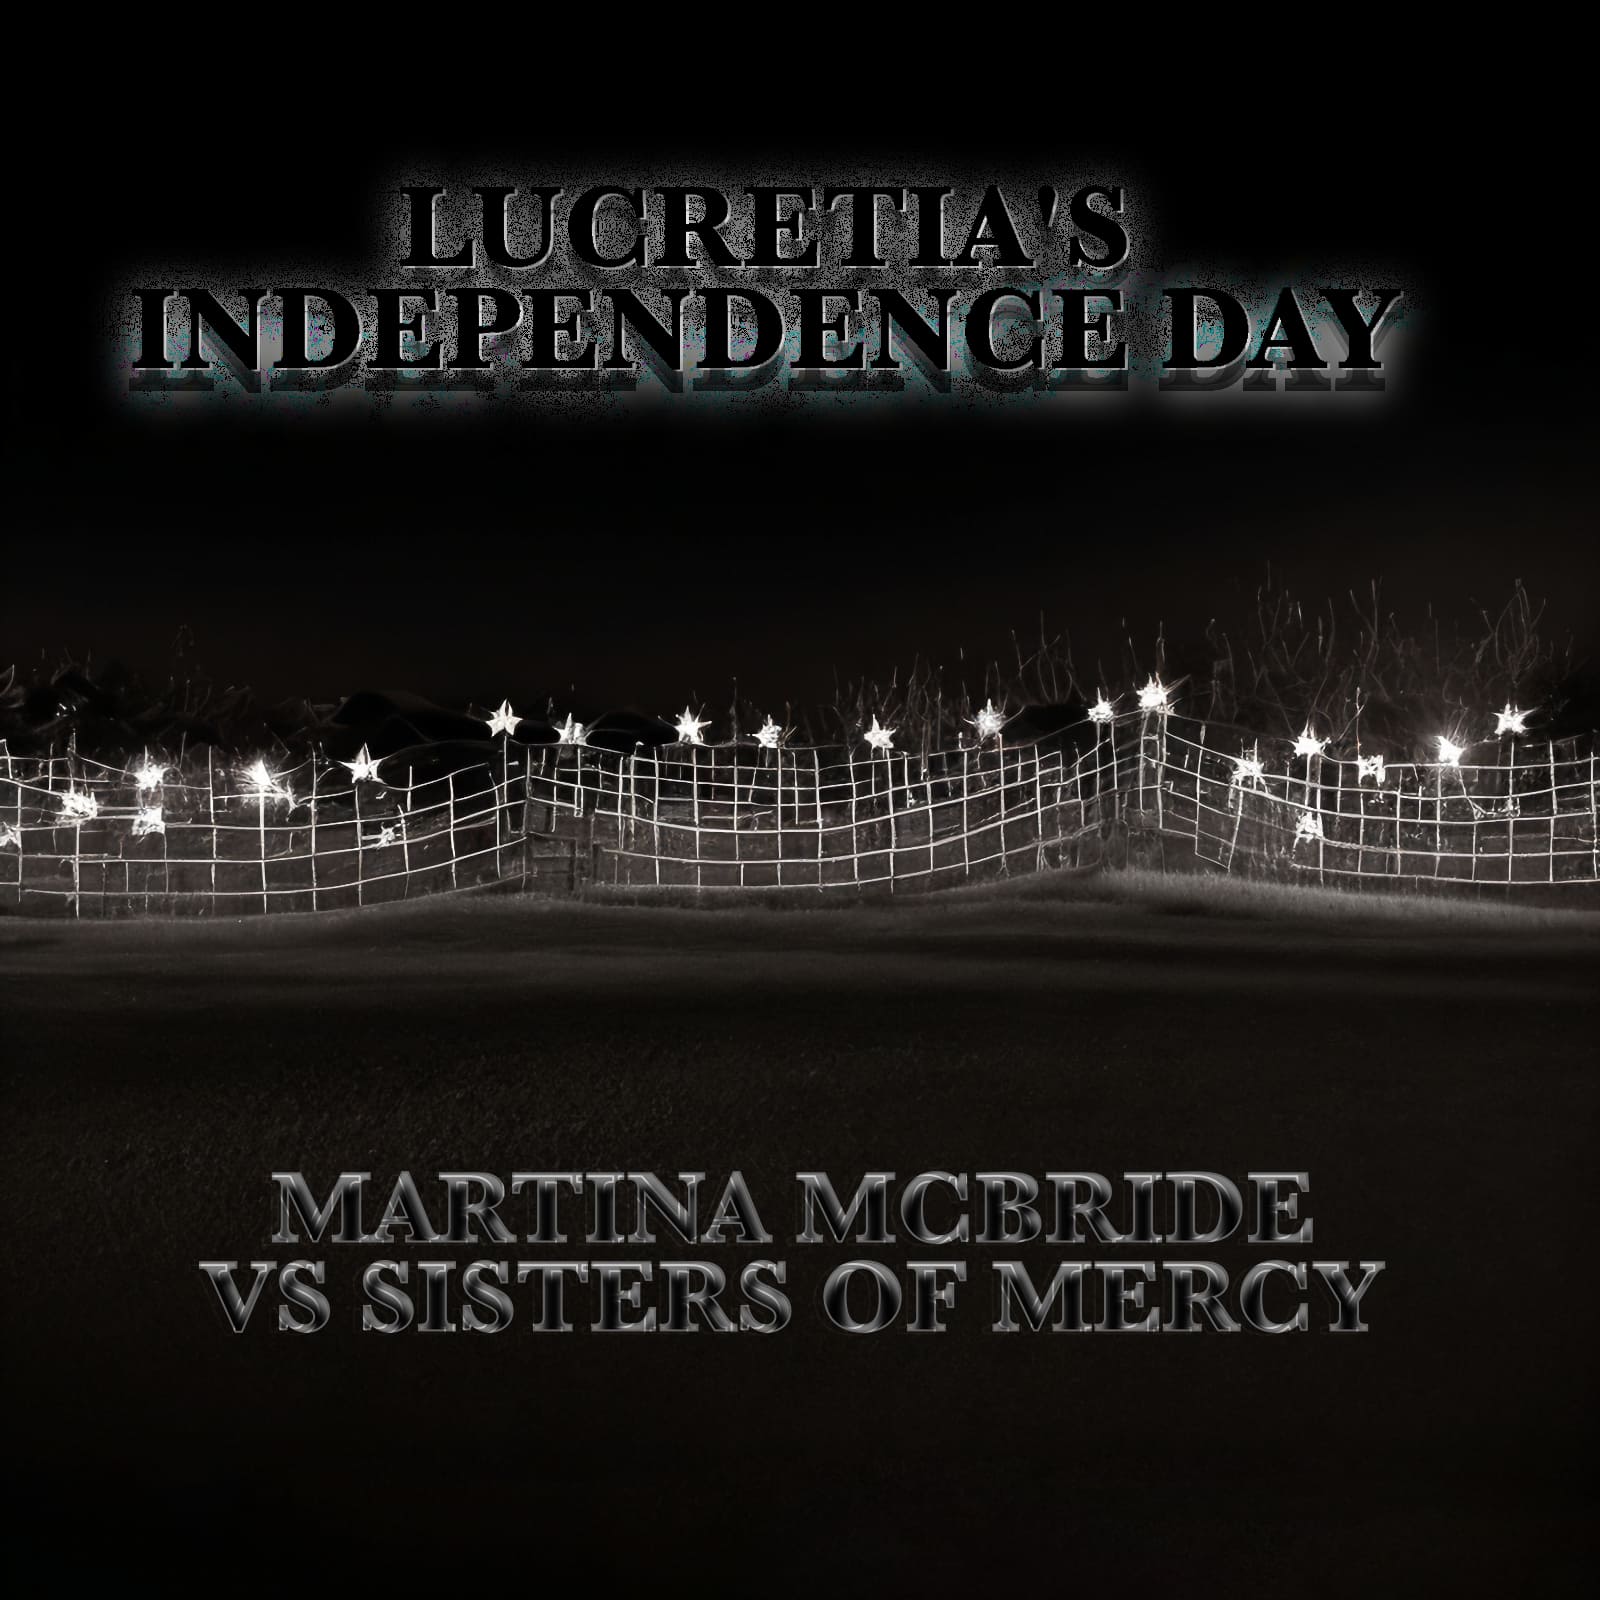 Lucretia’s Independence Day (America #4) (Martina McBride vs Sisters of Mercy)